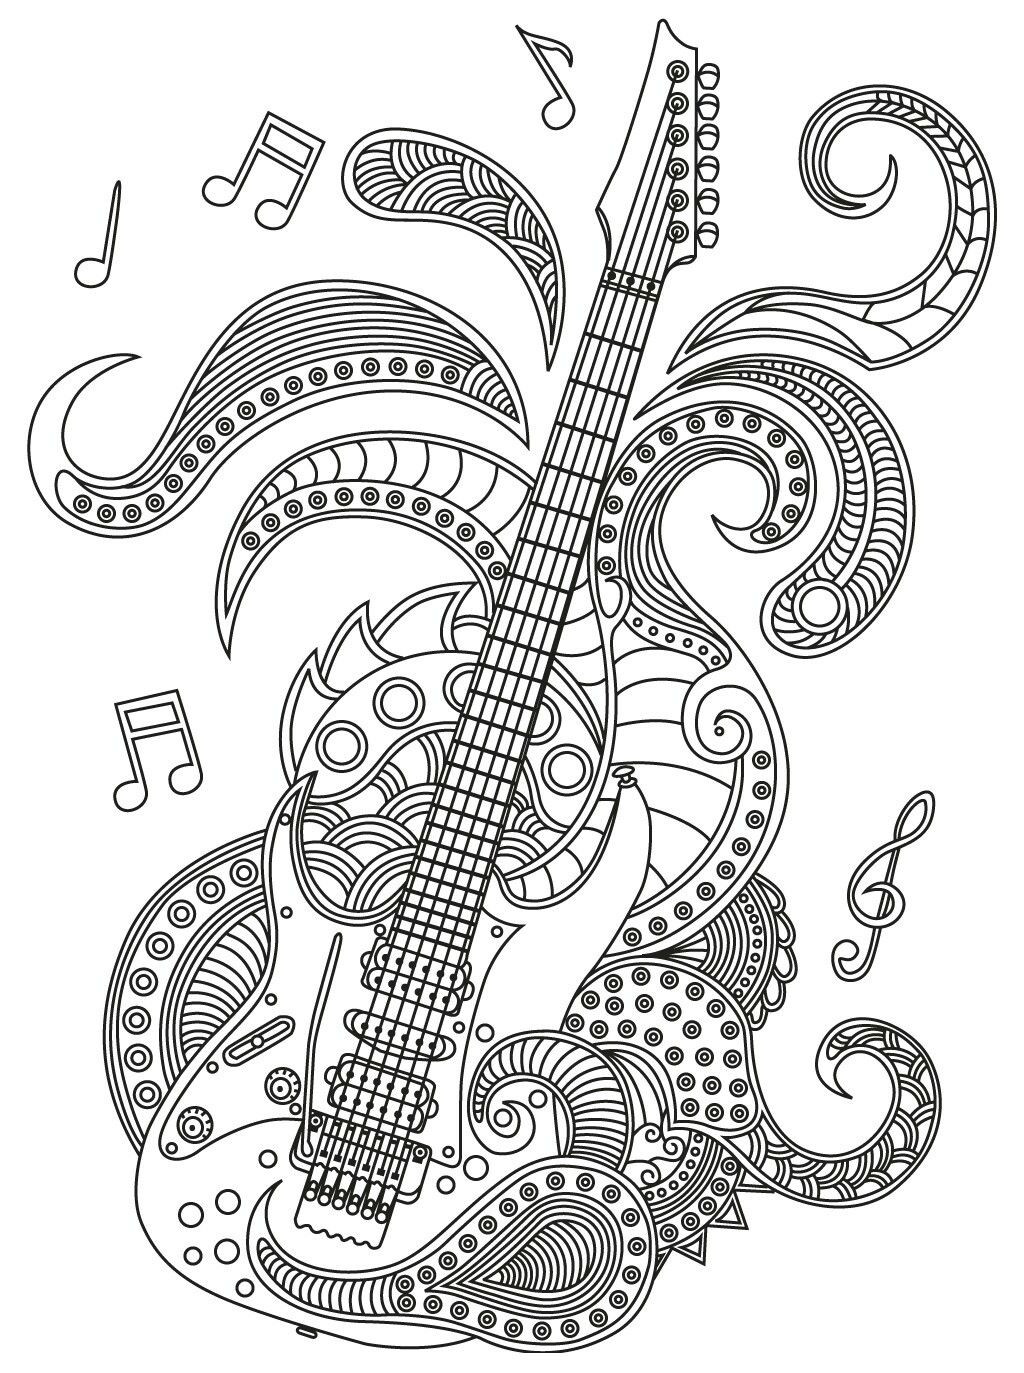 23 Ideas for Guitar Coloring Pages for Adults - Home, Family, Style and